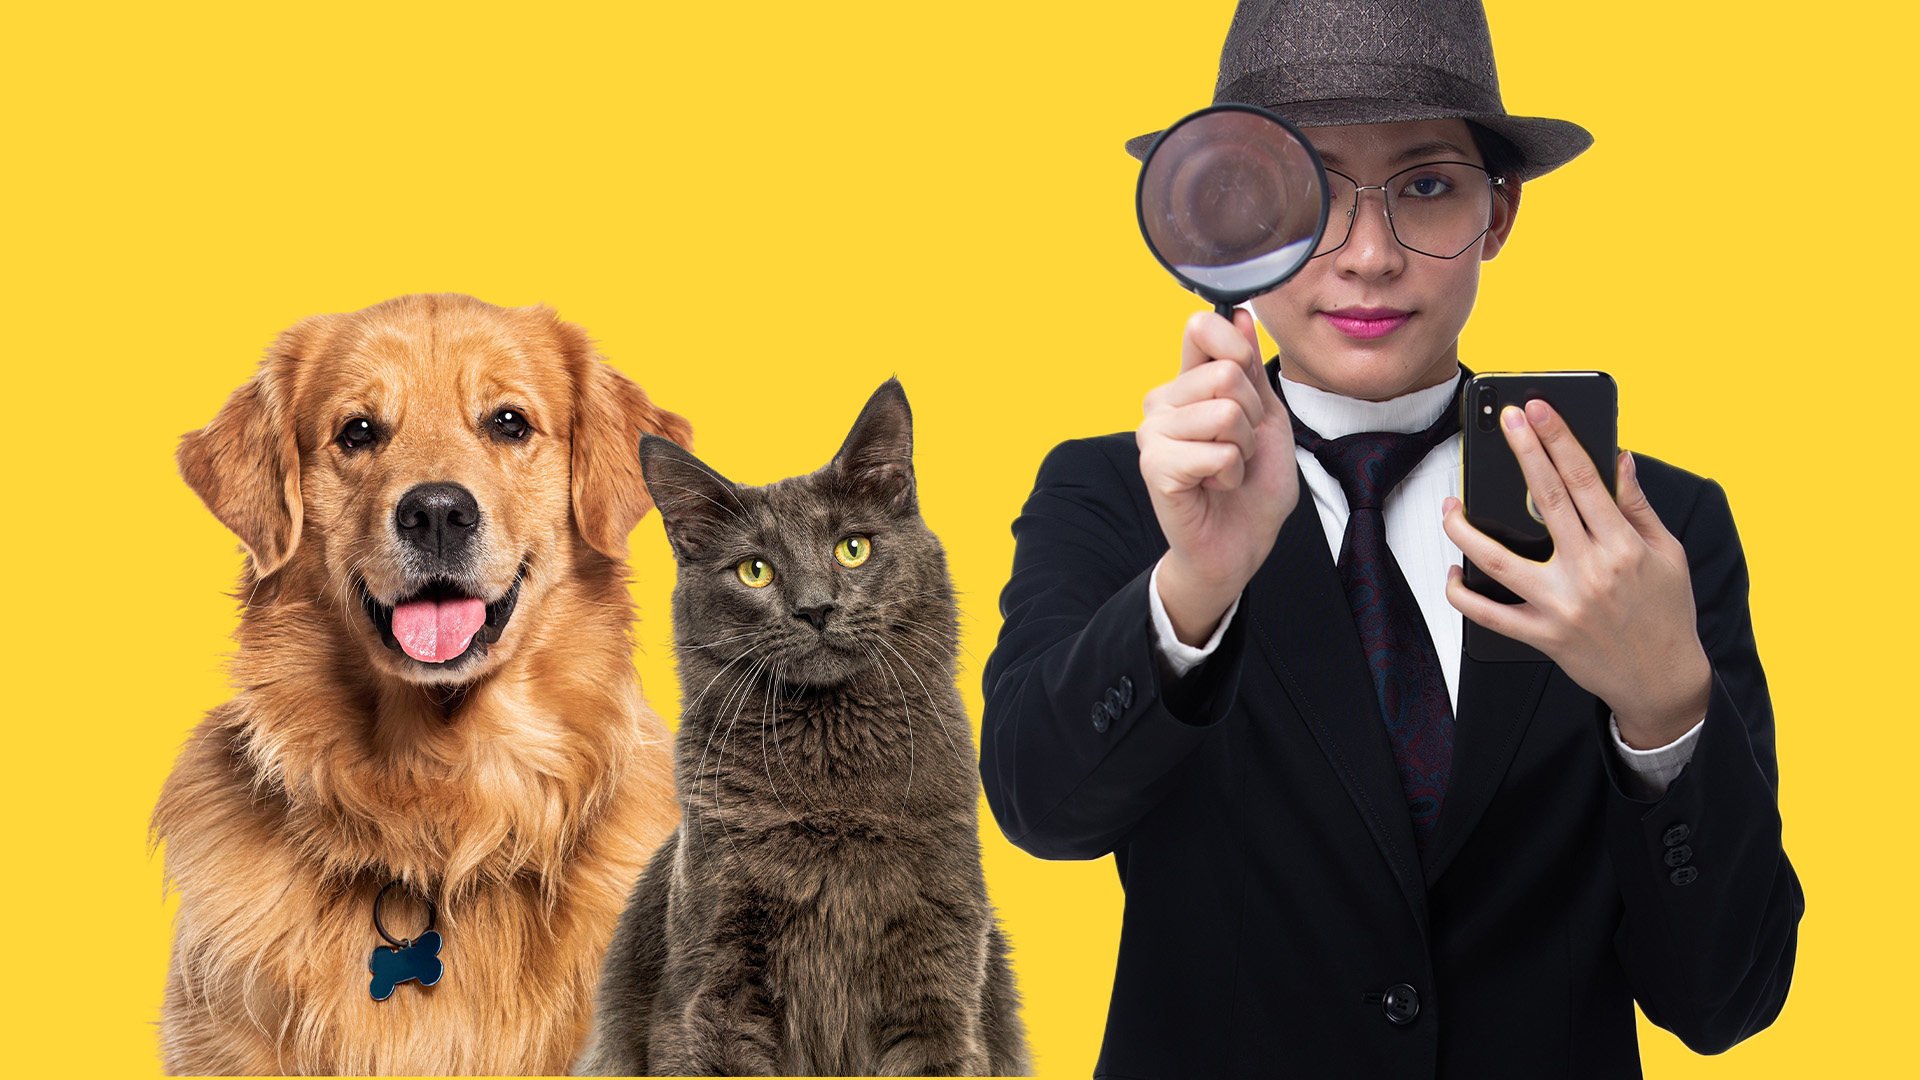 The Post investigates the unusual business of being a pet detective in China. Photo: SCMP composite/Shutterstock